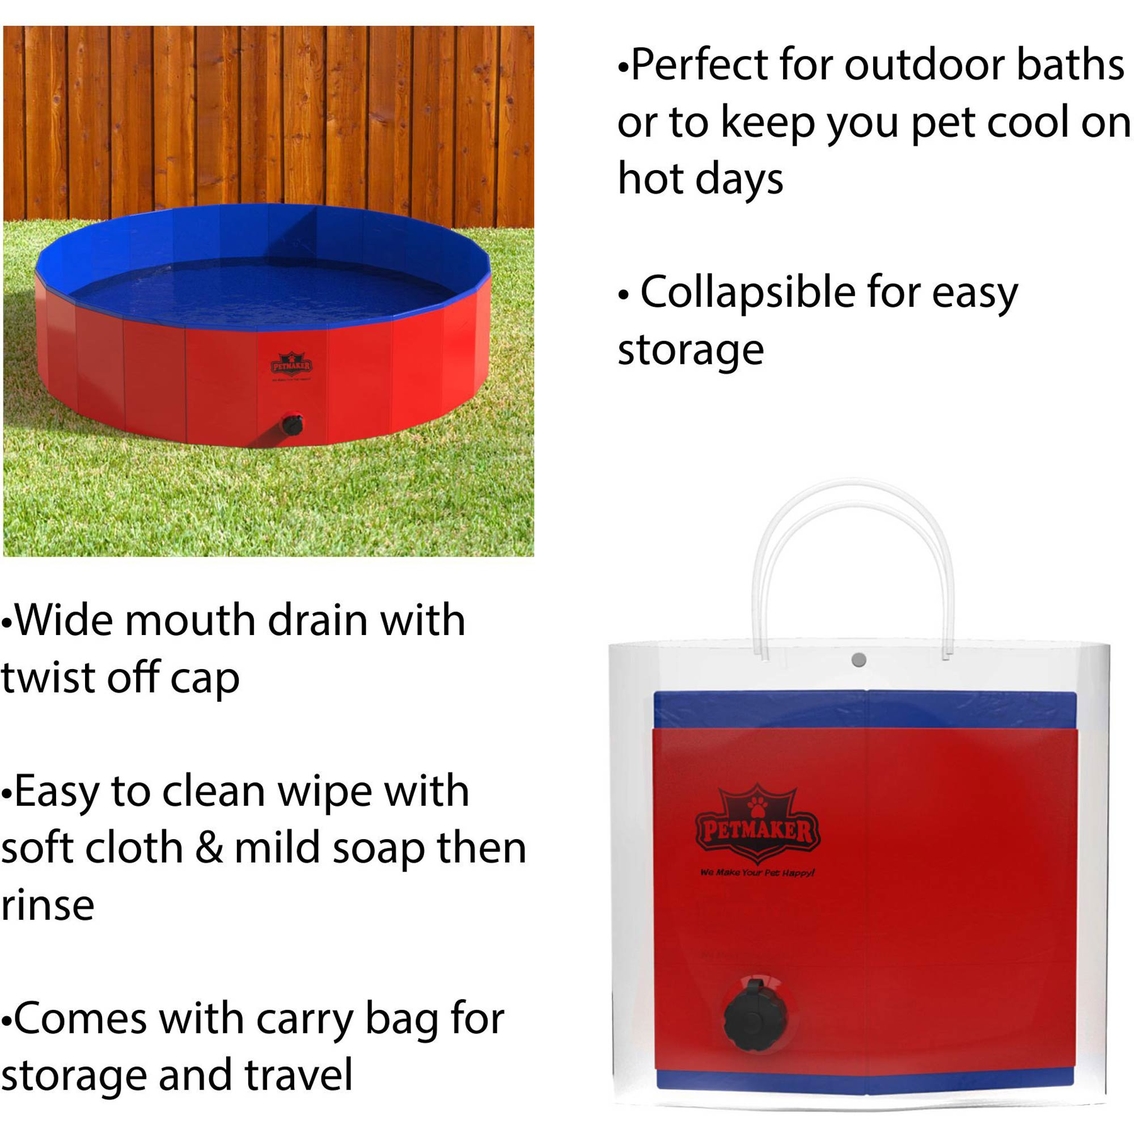 Petmaker Collapsible Pet Dog Pool and Bathing Tub - Image 4 of 8